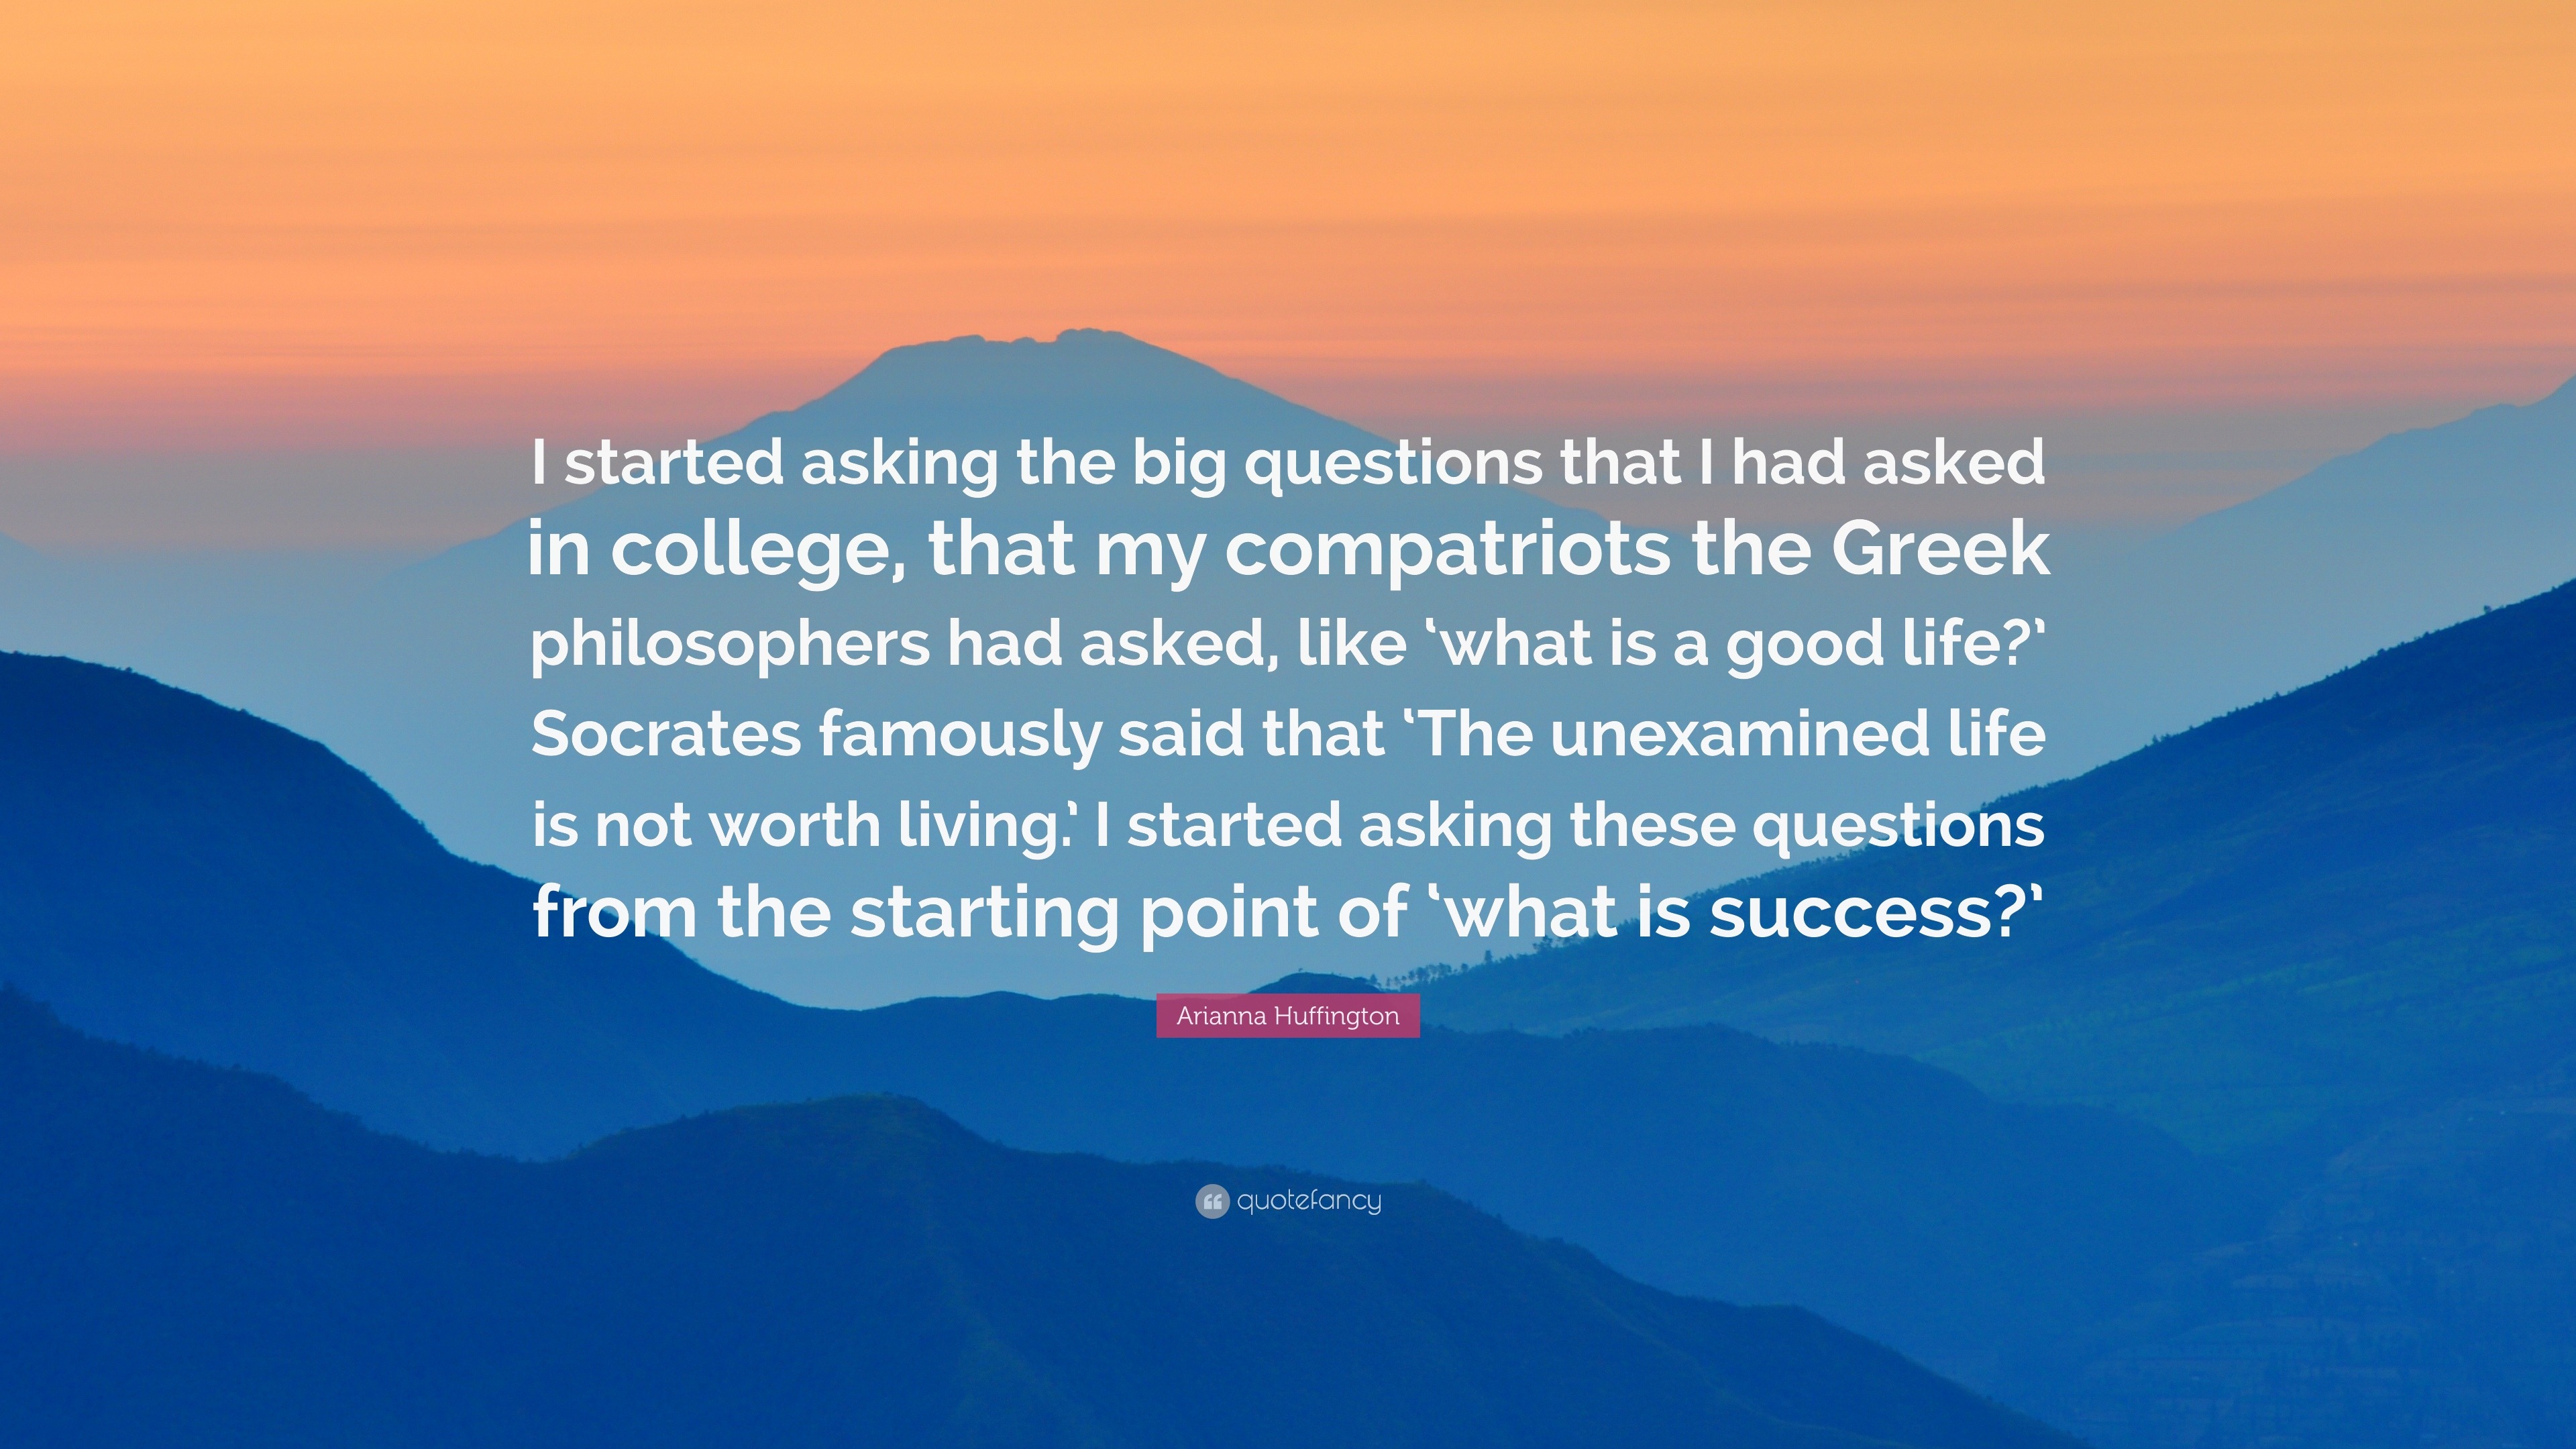 Arianna Huffington Quote “I started asking the big questions that I had asked in